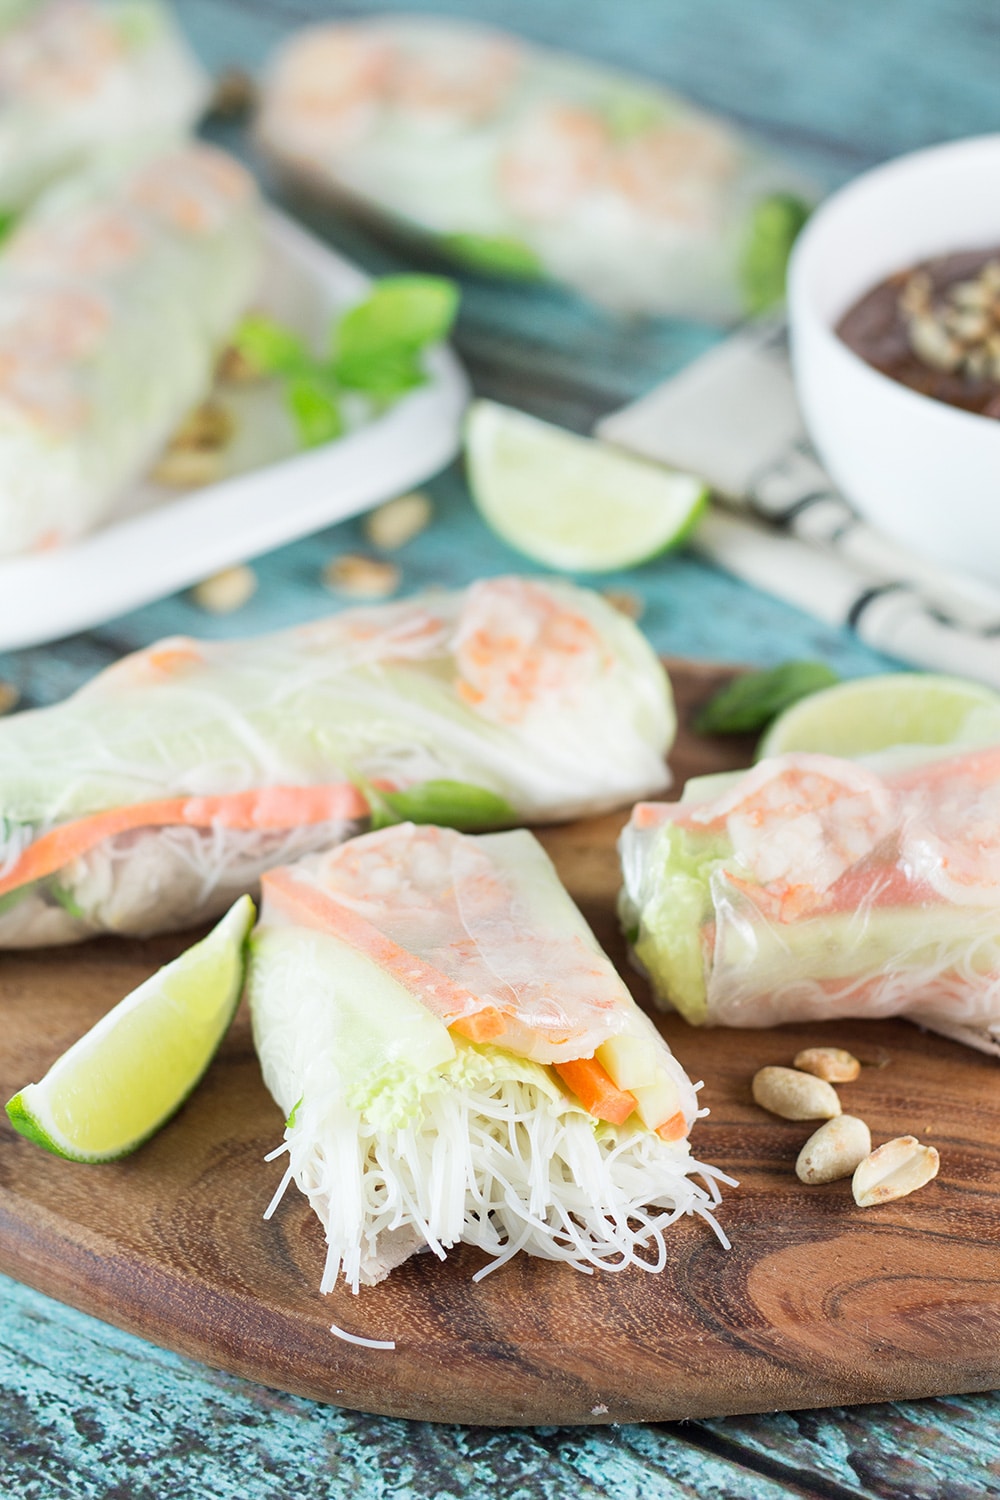 These fresh Vietnamese Spring Rolls (Goi Cuon) are stuffed with pork, shrimp, veggies, and rolled with rice paper. Served with crazy delicious peanut sauce, they make a perfect appetizer or snack! | cookingtheglobe.com